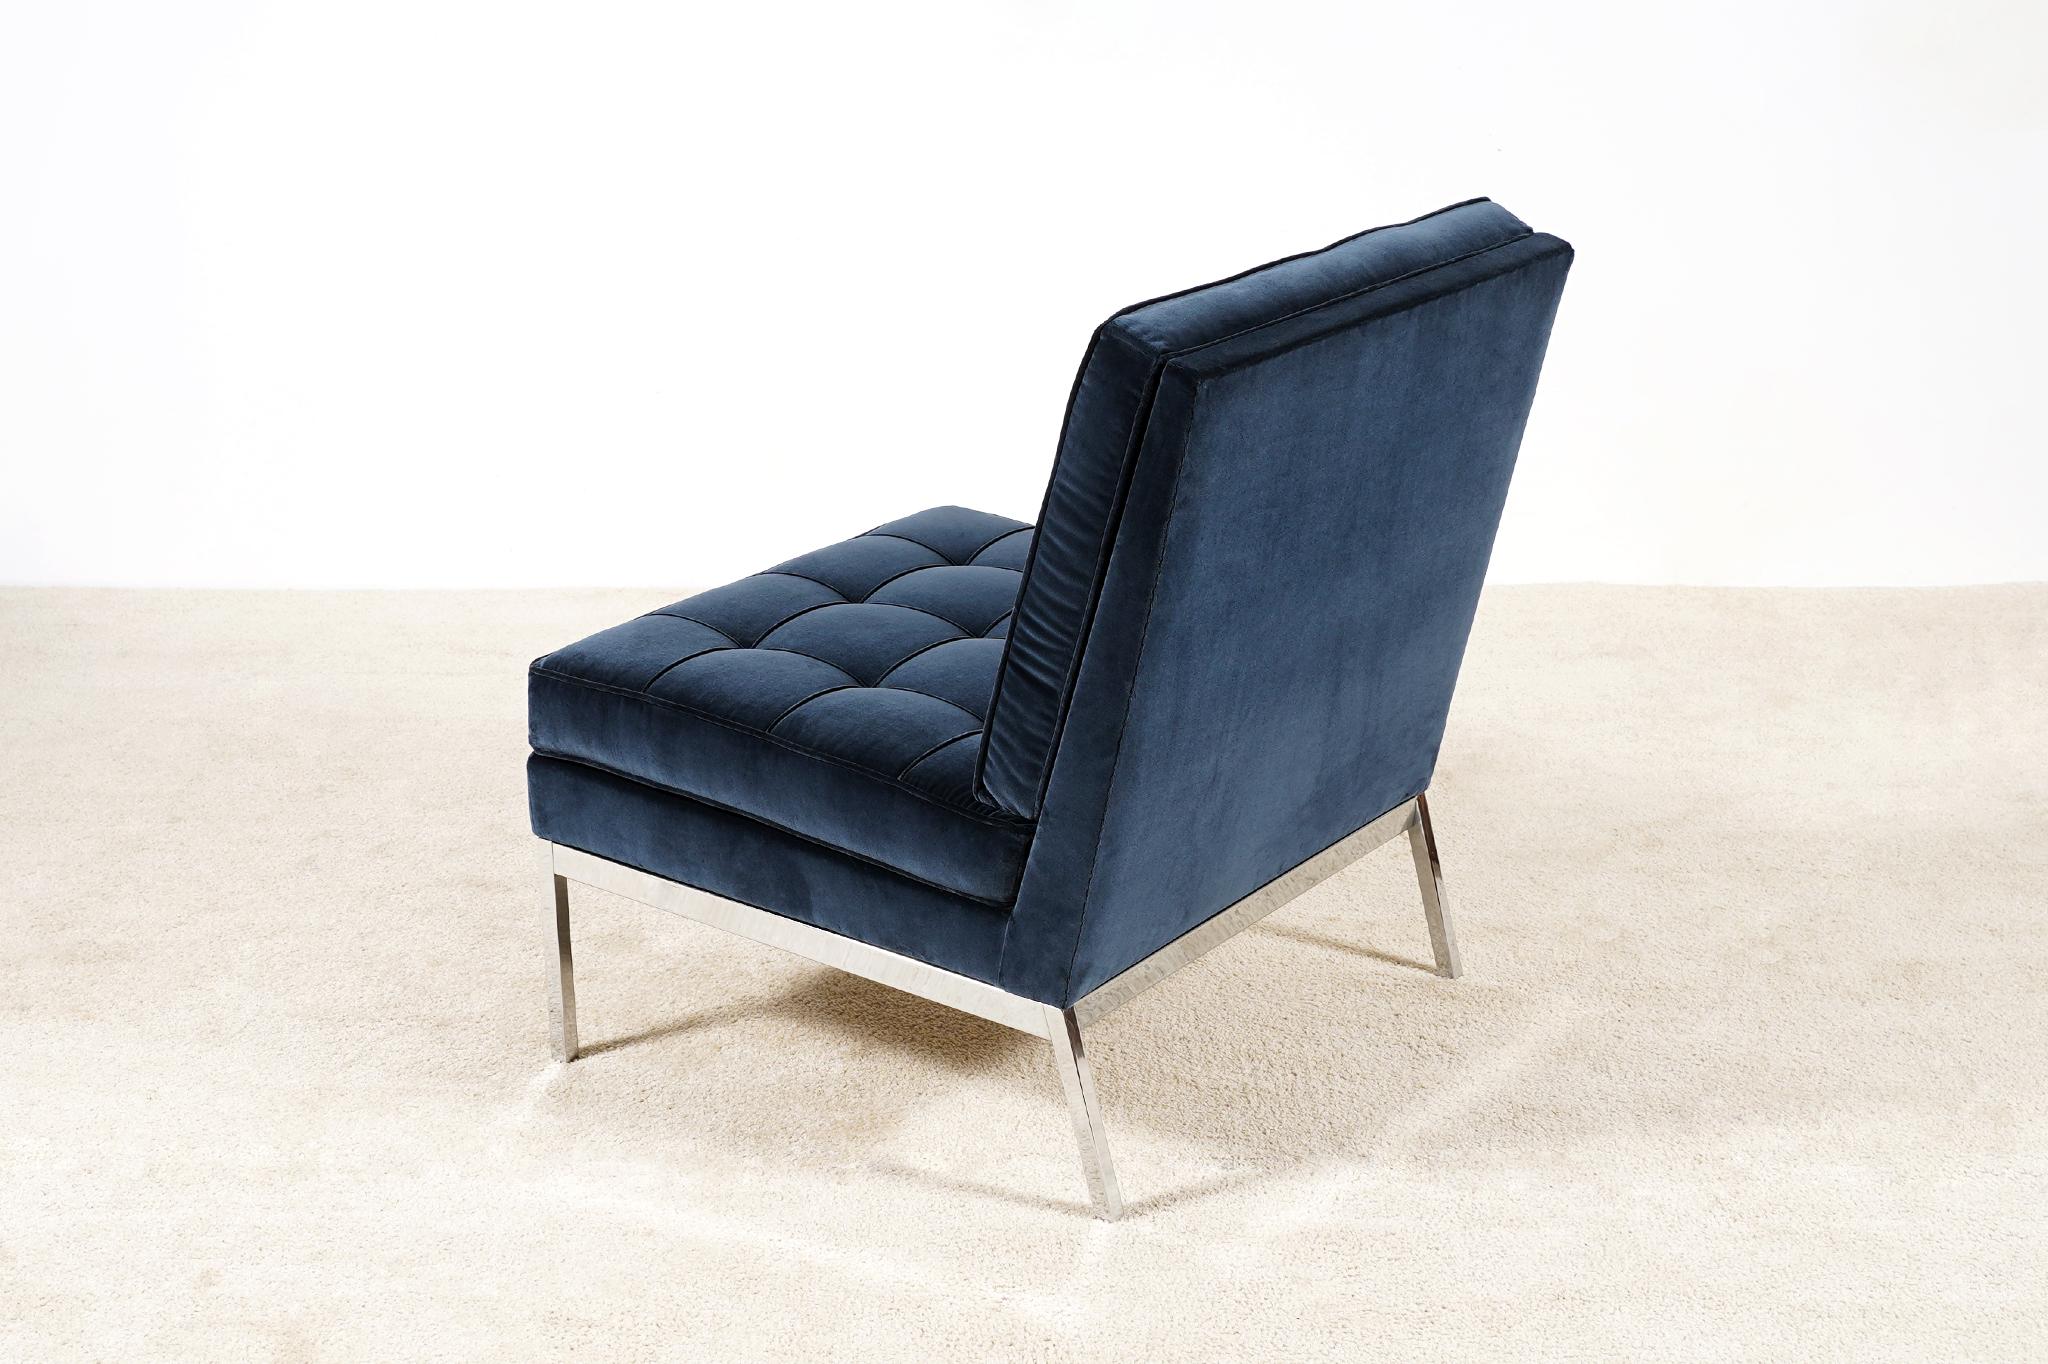 American Florence Knoll, Lounge Chair Model 65 for Knoll, circa 1960